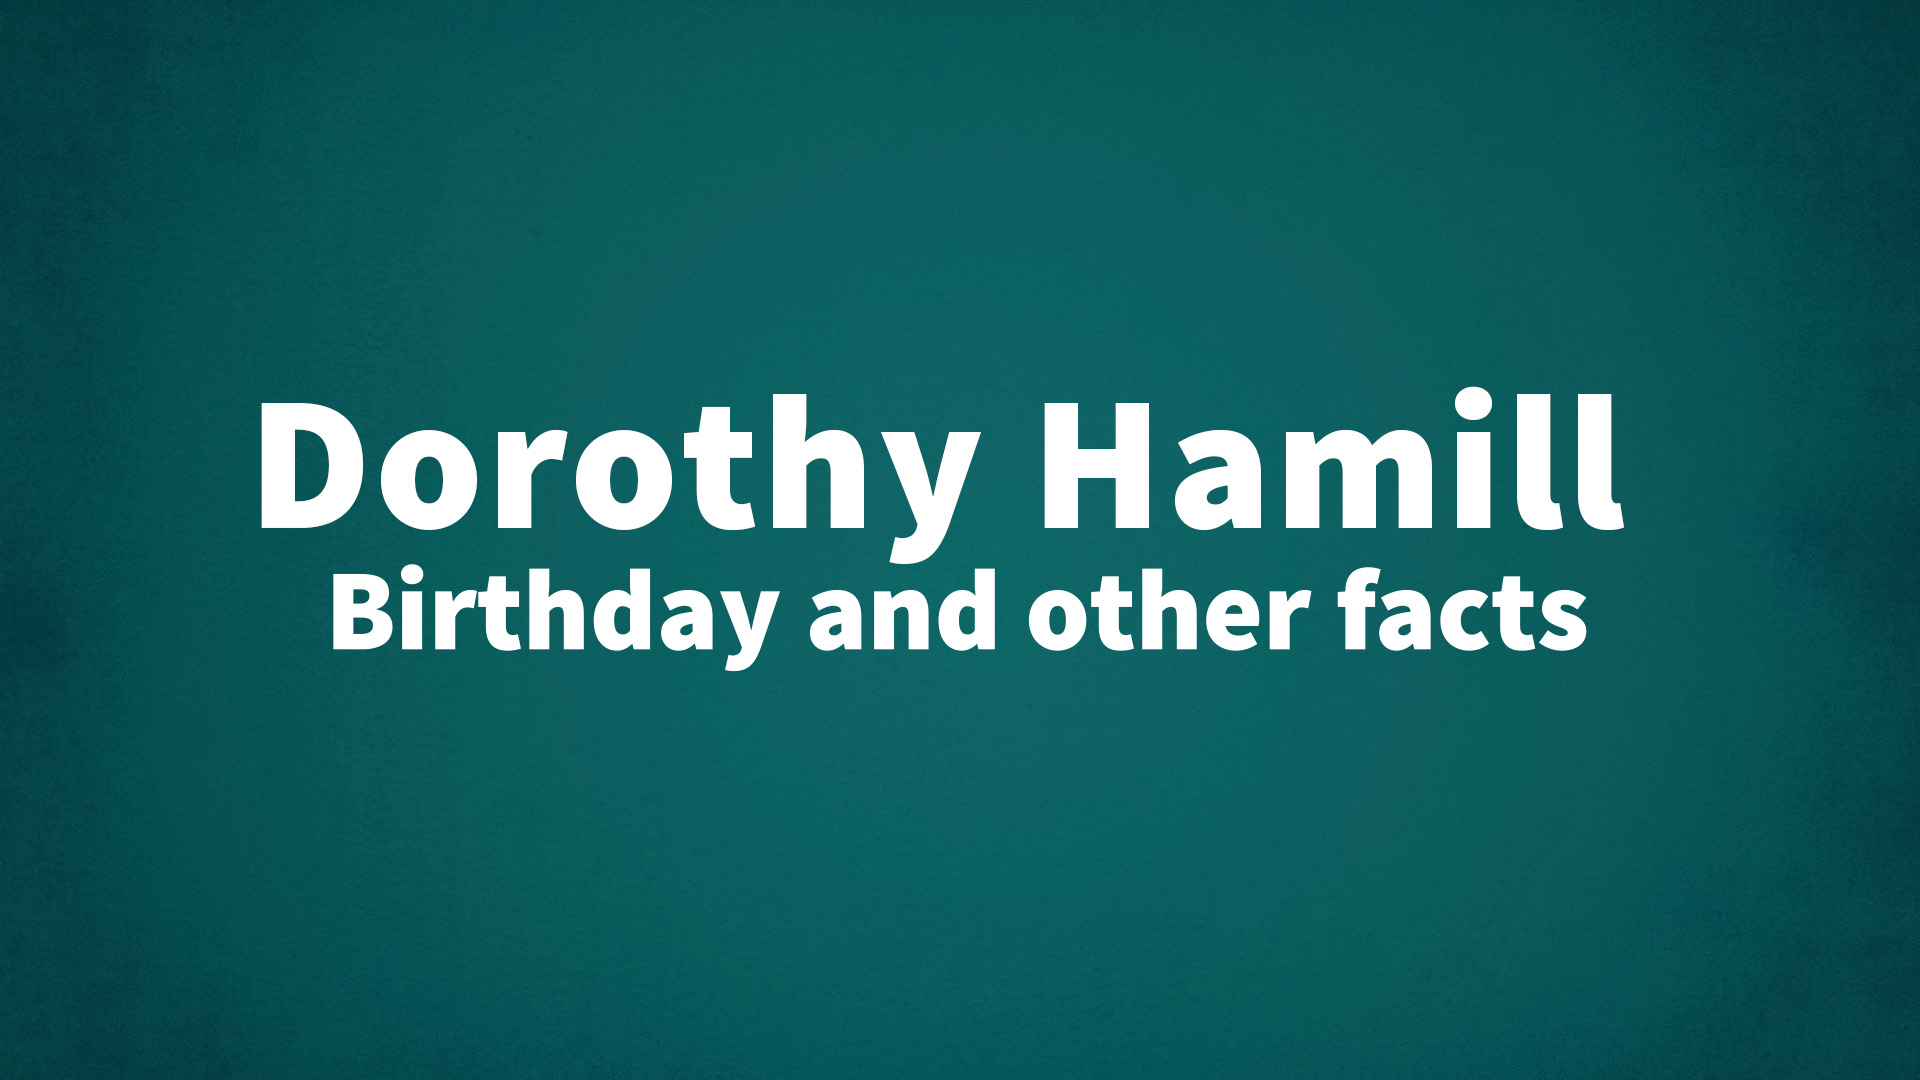 title image for Dorothy Hamill birthday